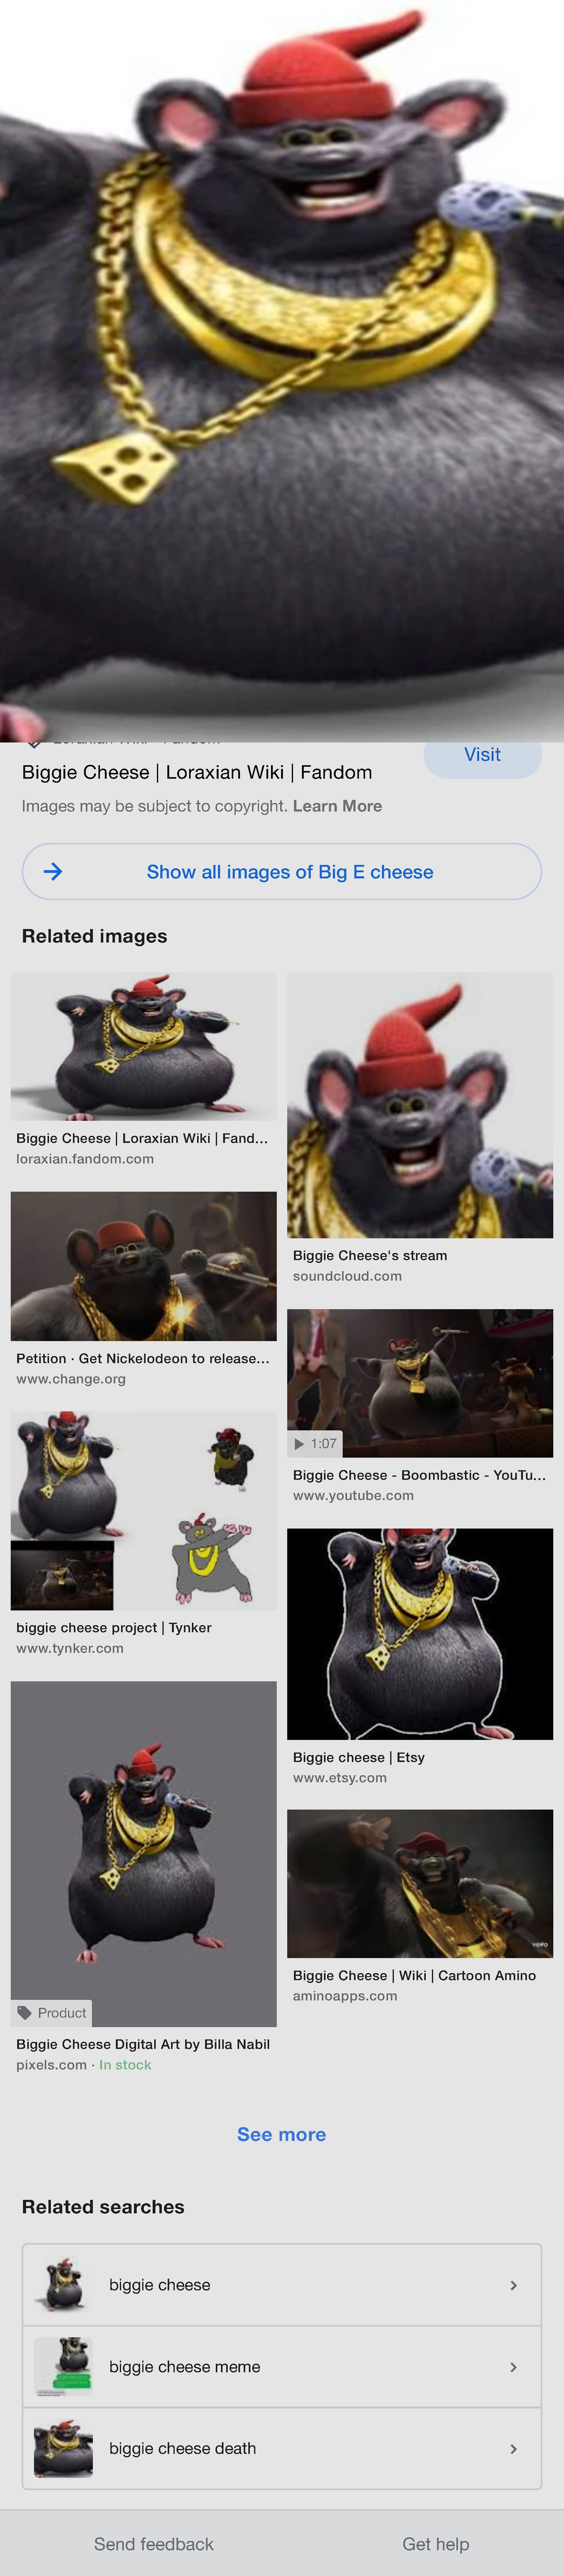 Where is biggie cheese from All Images Shopping Videos News Maps Biggie  Cheese was born at some hospital in Detroit on August 1954. > wiki Biggie  Cheese - Loraxian Wiki - Fandom